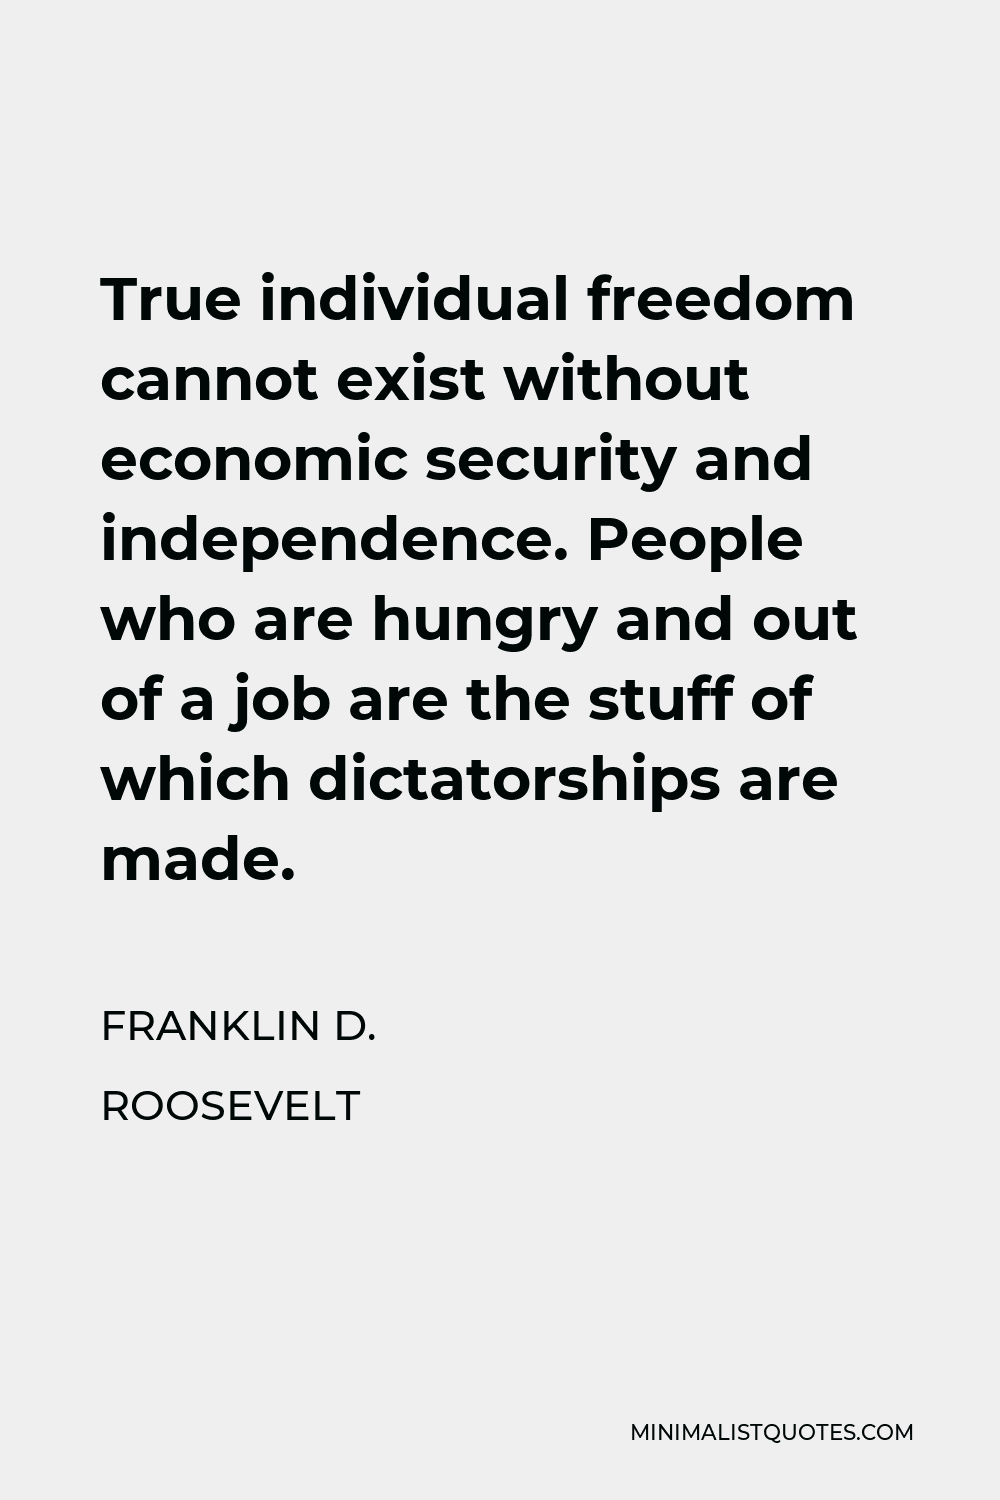 Franklin D. Roosevelt Quote - True individual freedom cannot exist without economic security and independence. People who are hungry and out of a job are the stuff of which dictatorships are made.